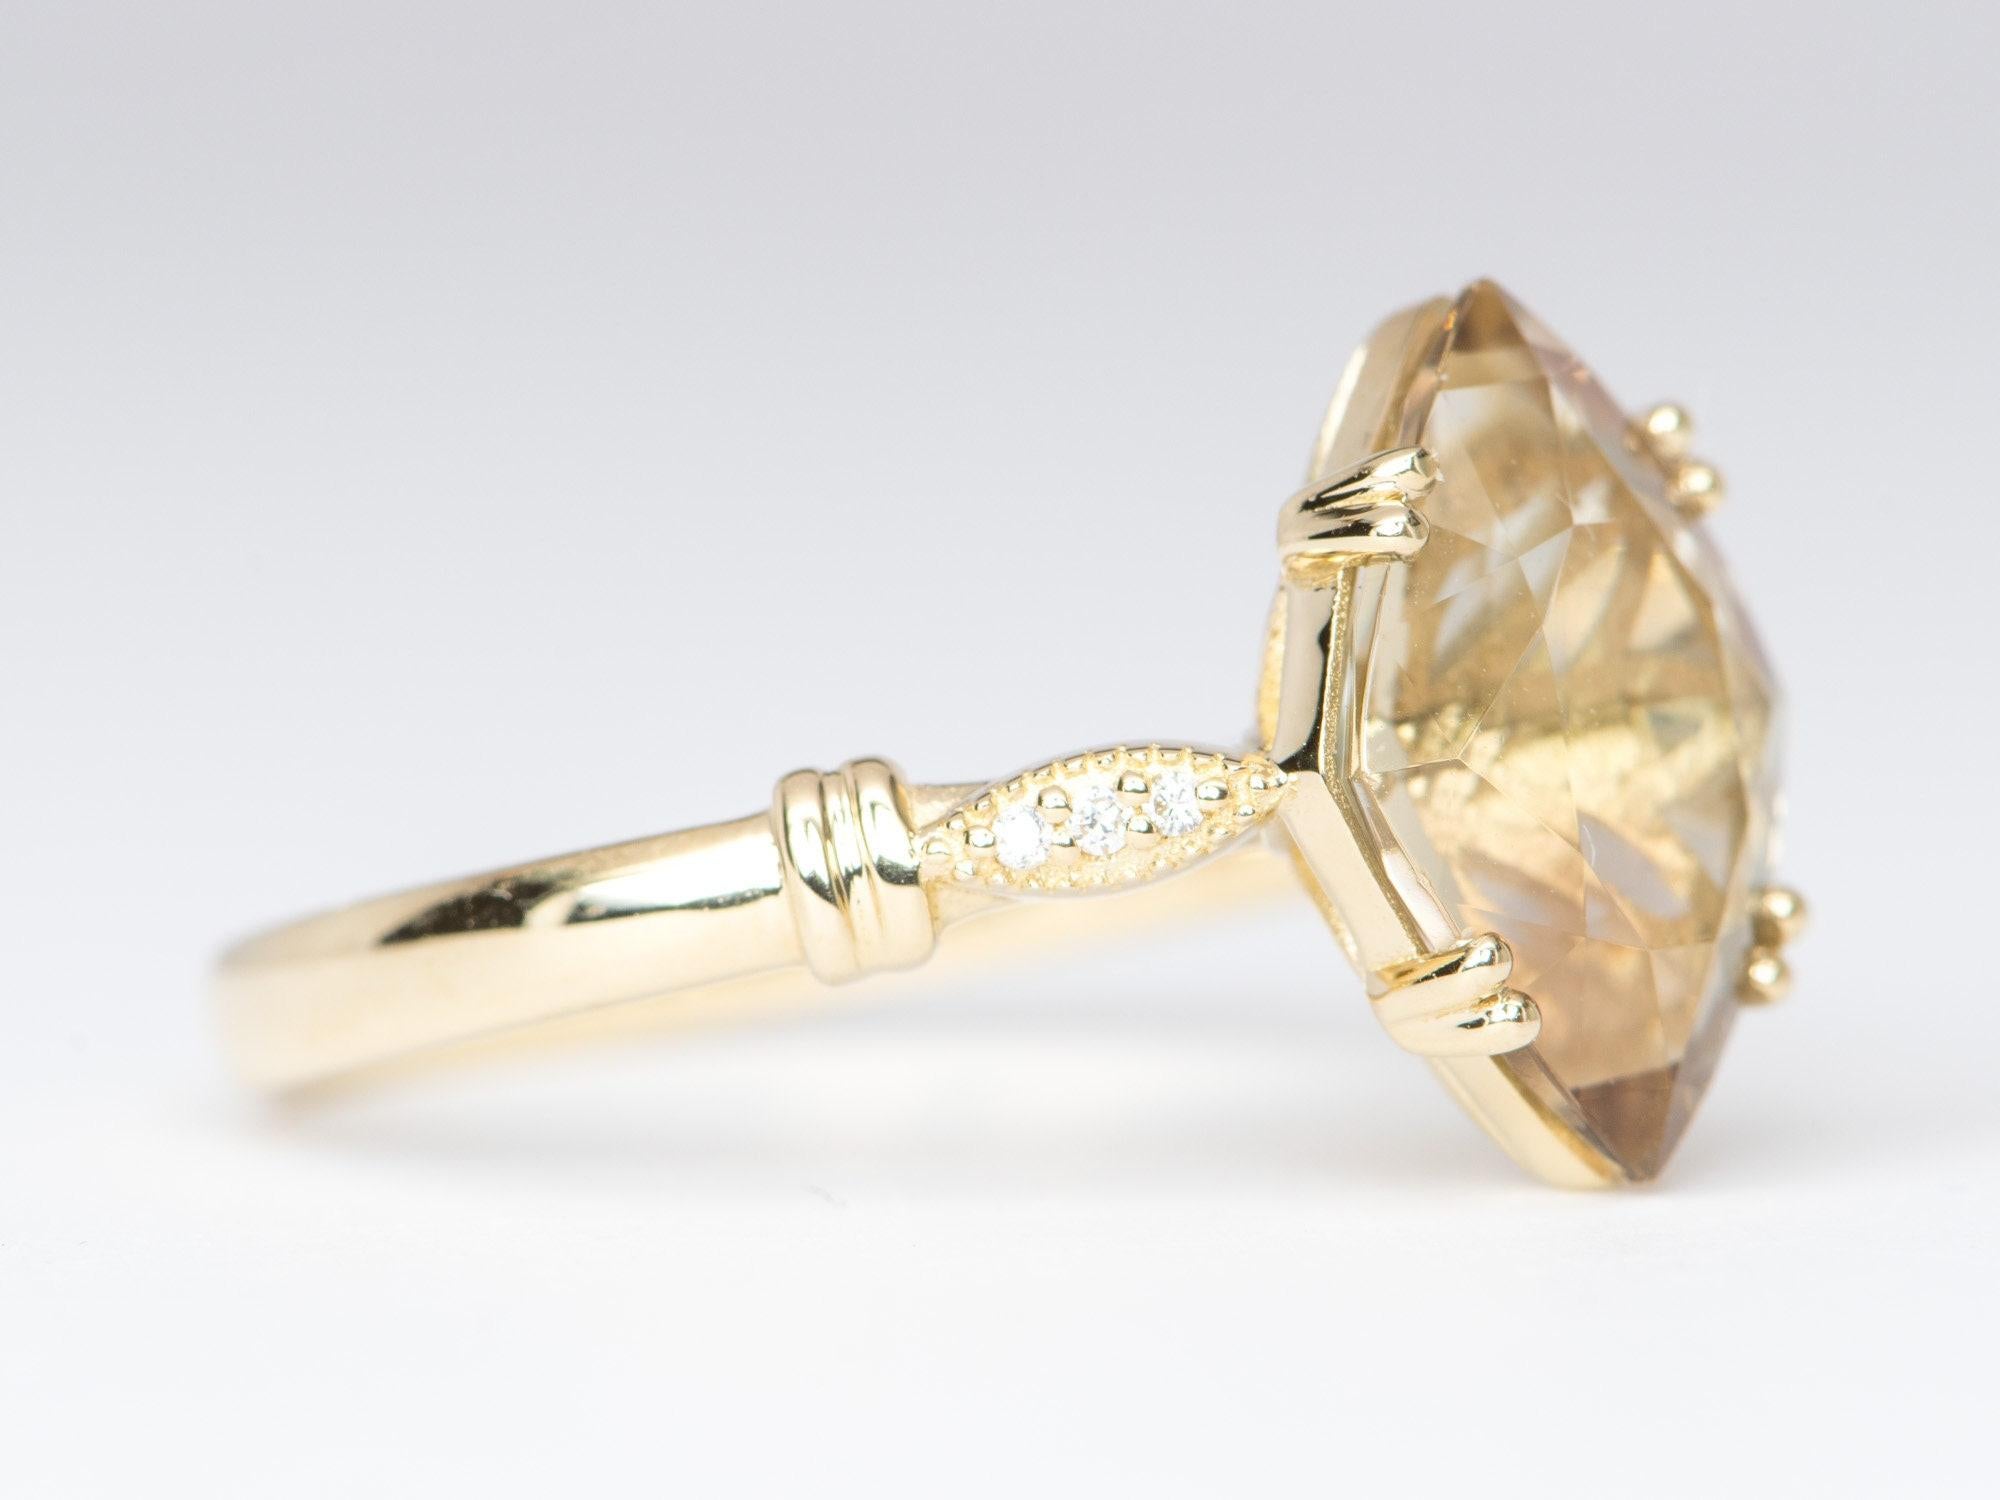 â™¥ Solid 14K yellow gold ring set with a kite-shaped champagne green Oregon sunstone in the center and diamond's on each side of the band
â™¥ The overall setting measures 9.7mm wide, 13.1mm in length, and sits 6.1mm tall from the finger


â™¥ Ring